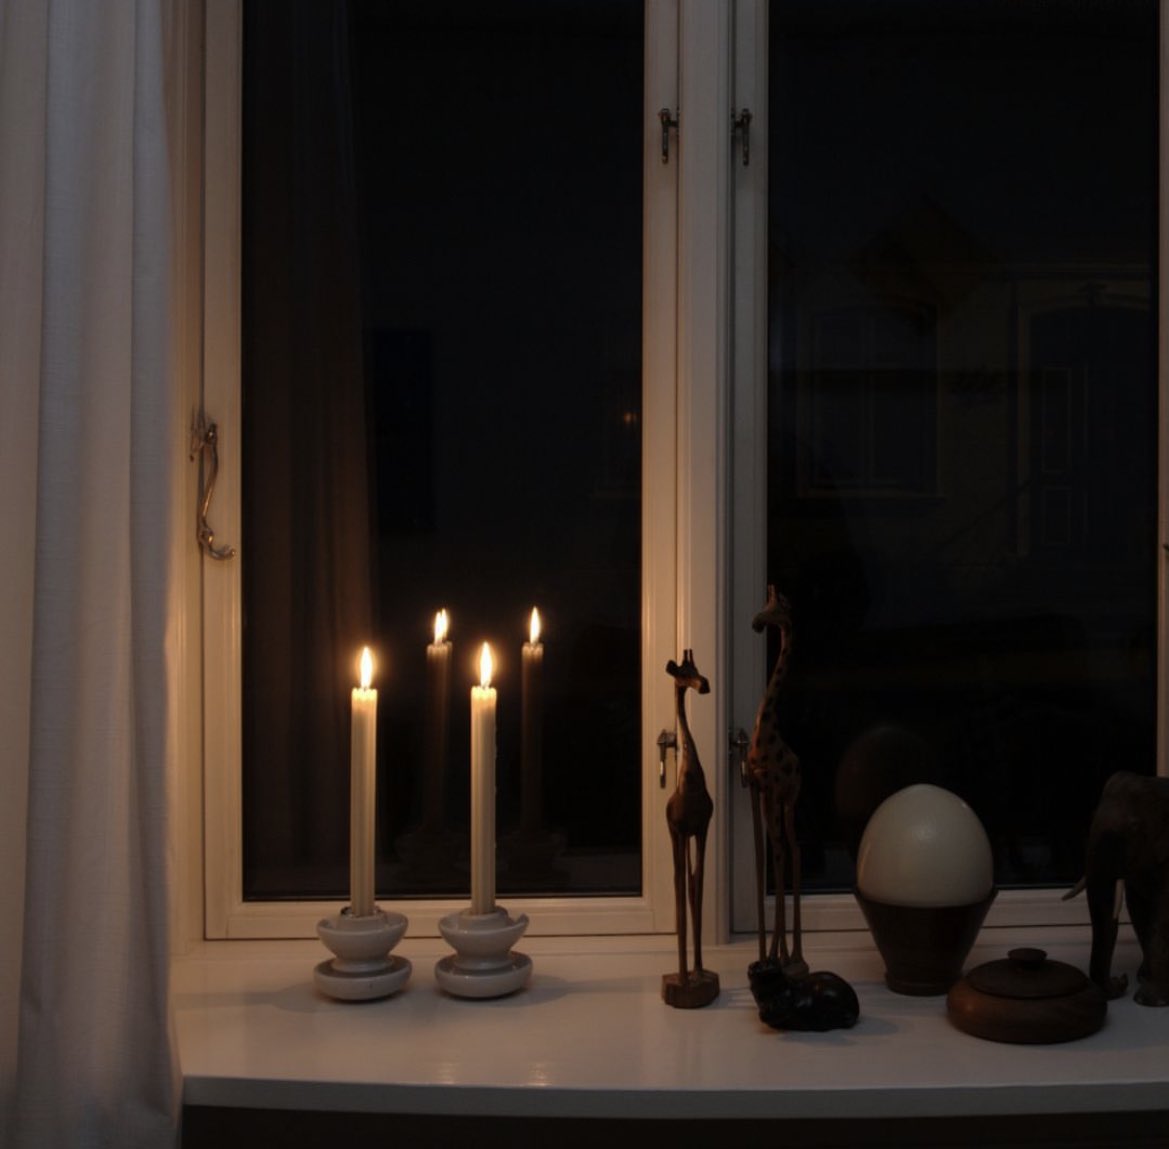 Tonight, on the evening of the 4th of May, Danes place lit candles on their window sills to commemorate Denmark’s liberation after WW II. Tomorrow, the 5th of May is the official #LiberationDay as this was the day when German occupation left the Danish territory.